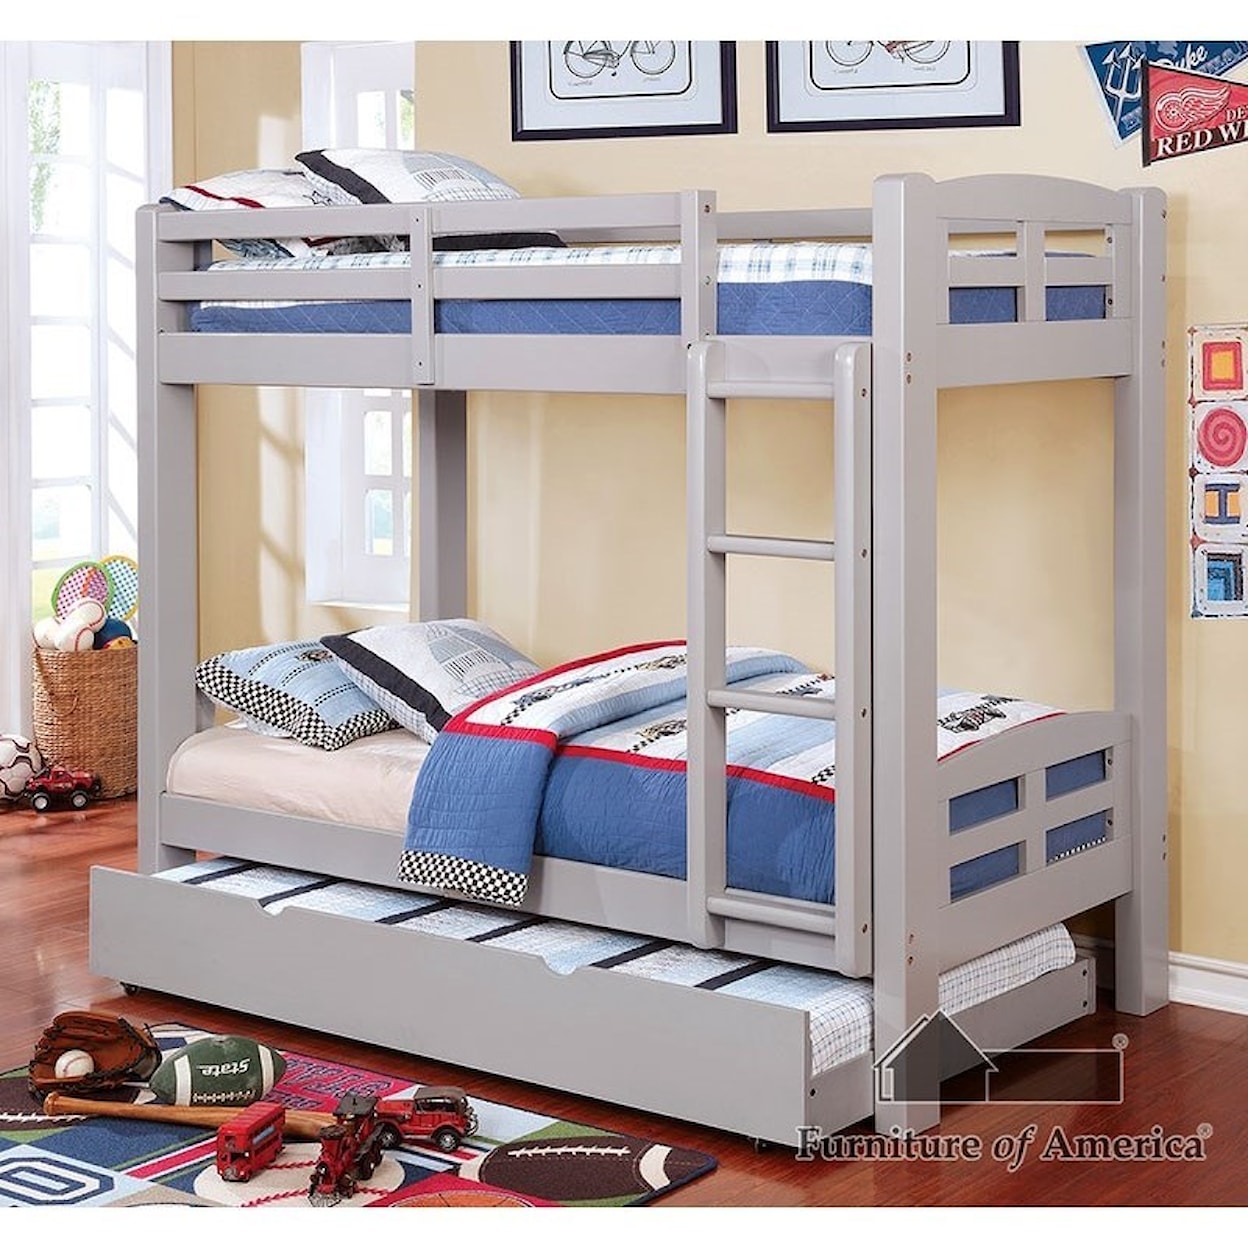 Furniture of America Solpine Twin/Full Bunk Bed